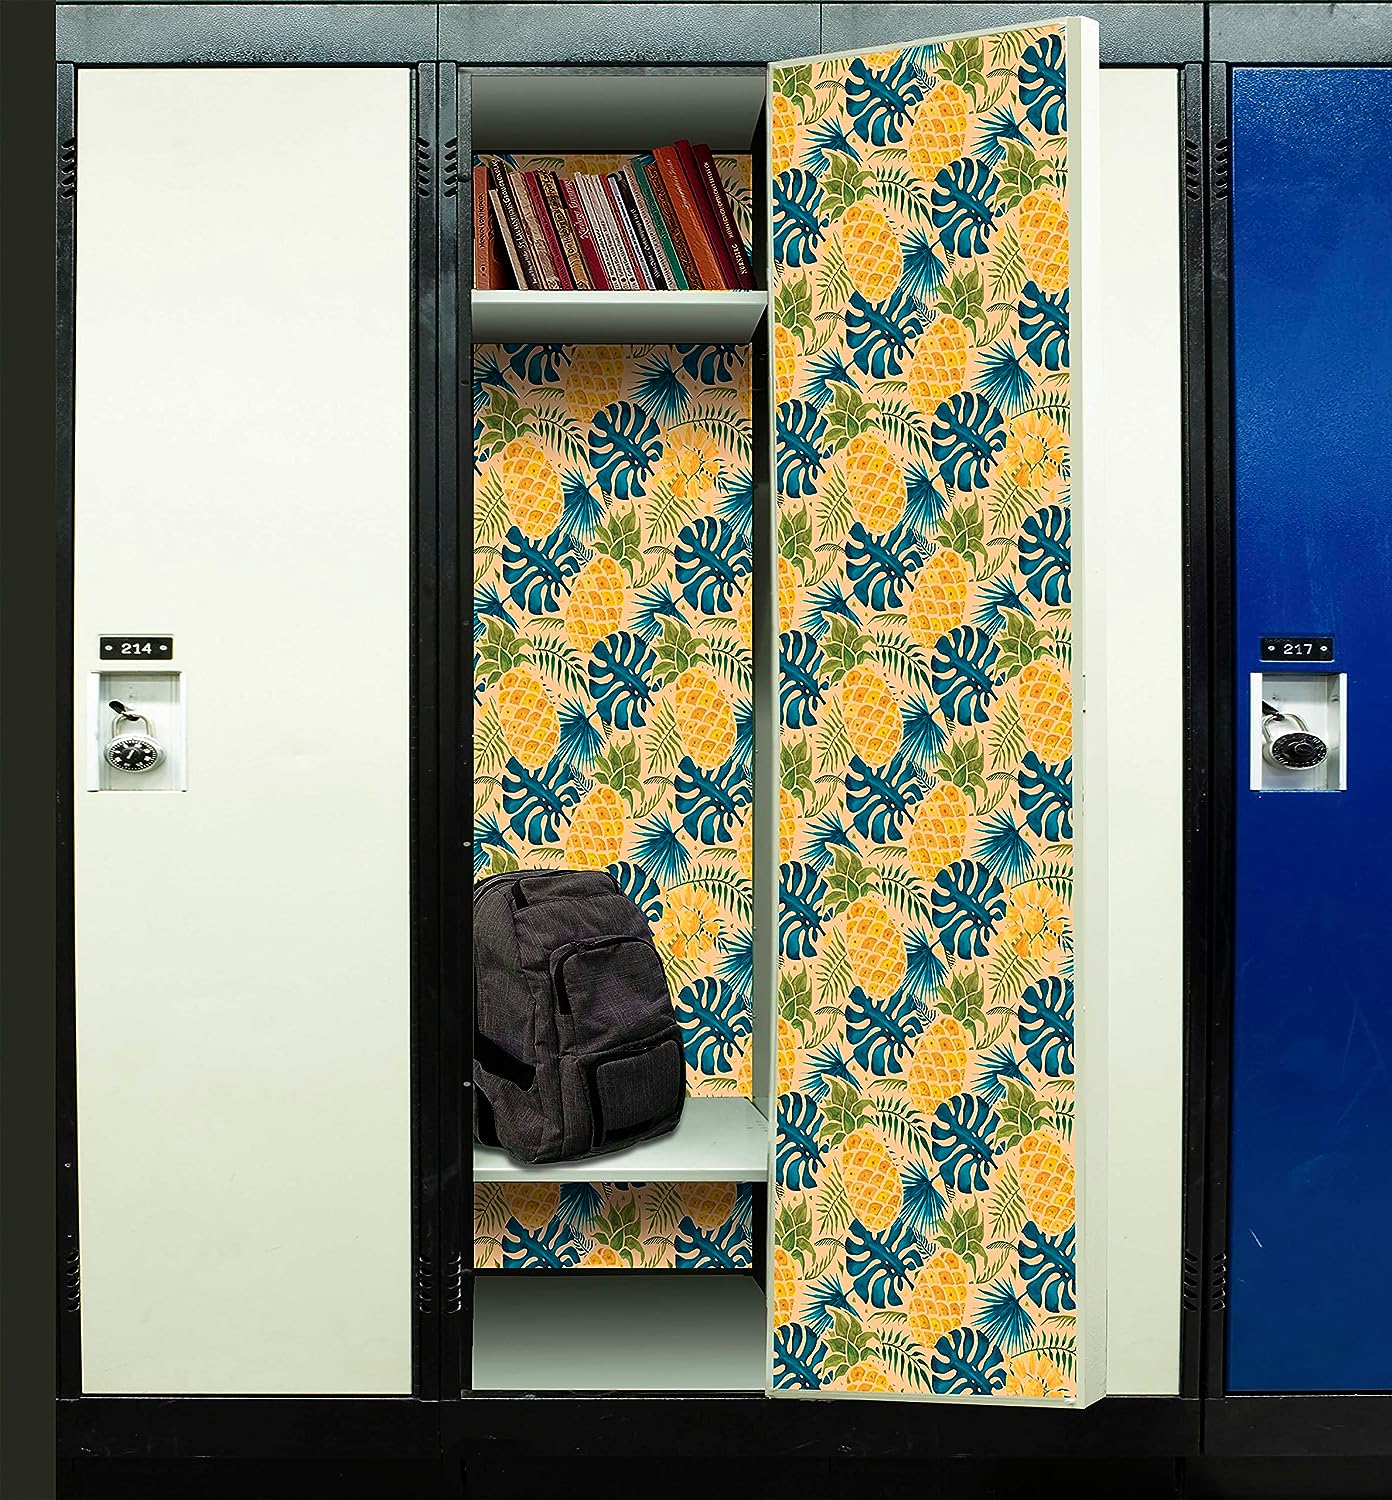 PELICAN INDUSTRIAL Magnetic Locker Wallpaper (Full Sheet Magnetic) - Trimmable, Easy Install, Remove & Reuse - (Tropical Leaves) - Pack of 3 Sheets (vb042)